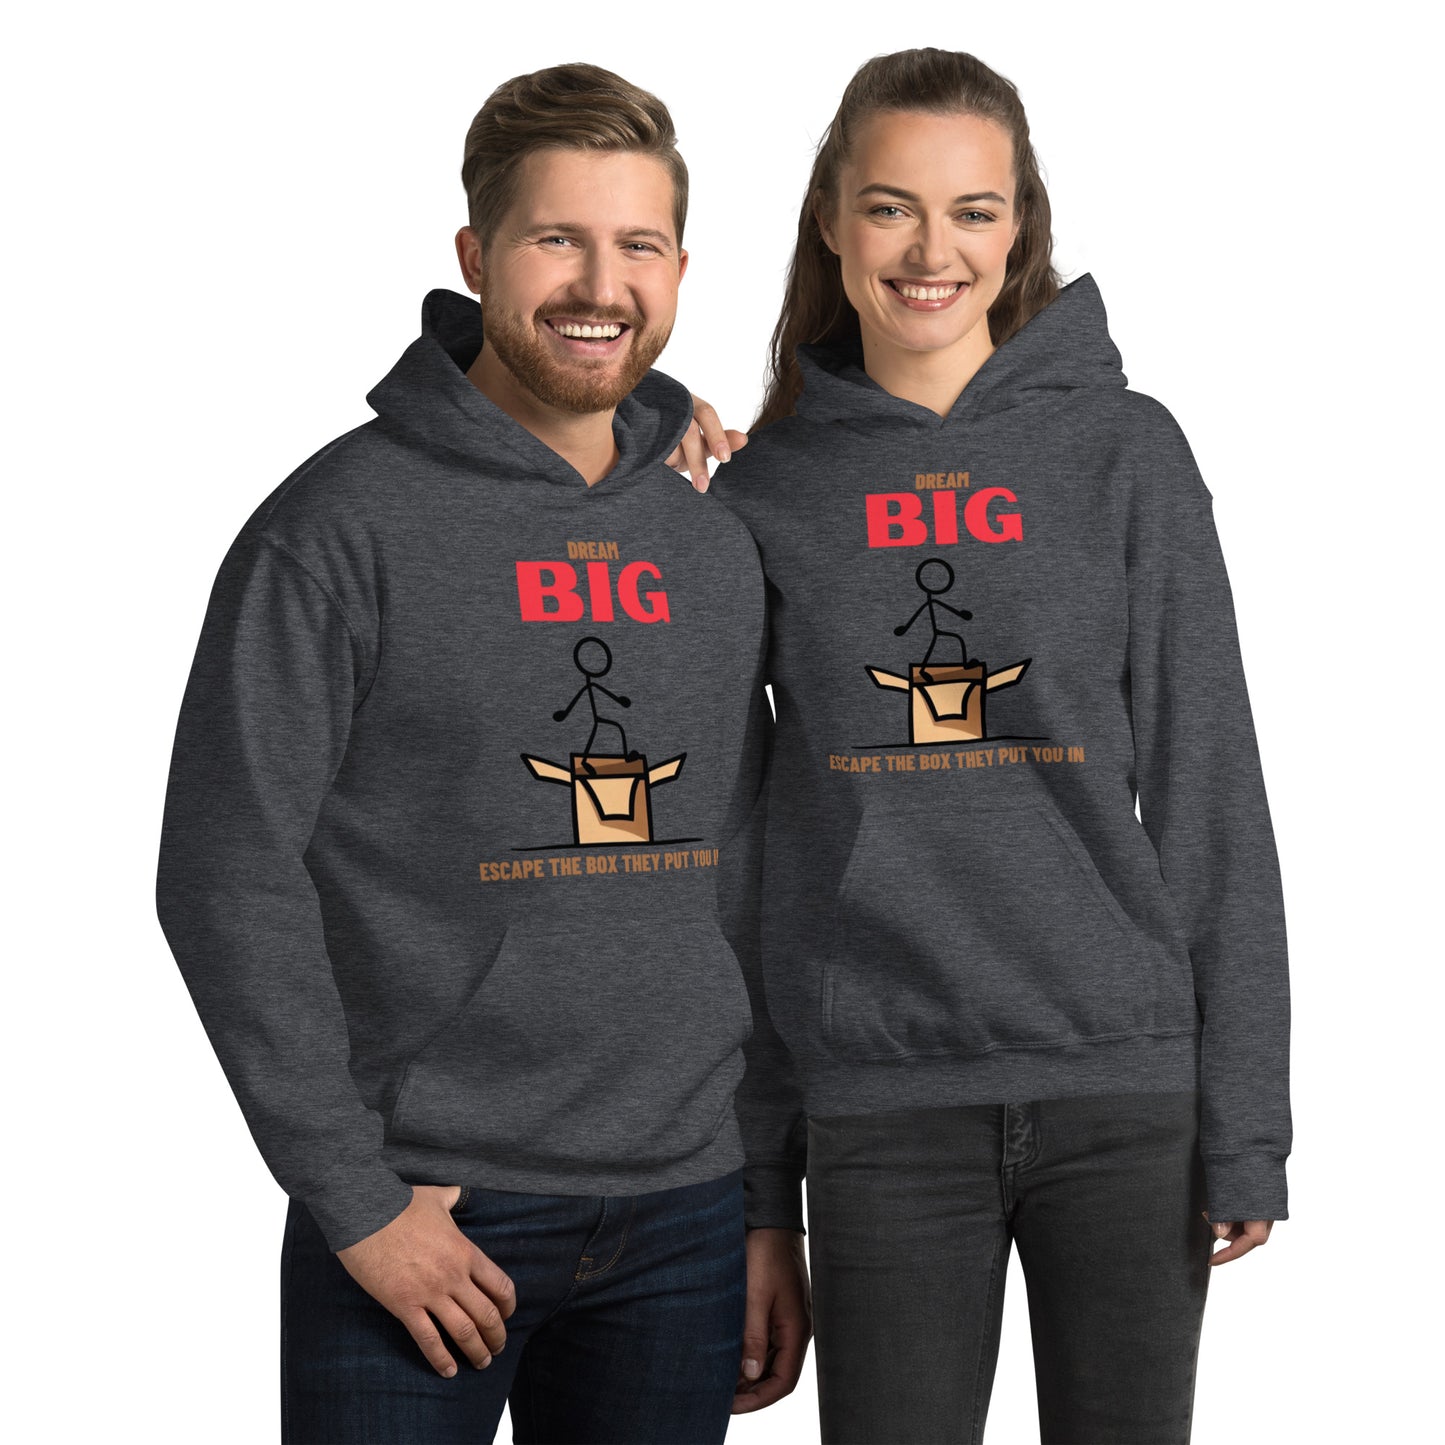 Dream Big - Escape The Box They Put You In Unisex Hoodie